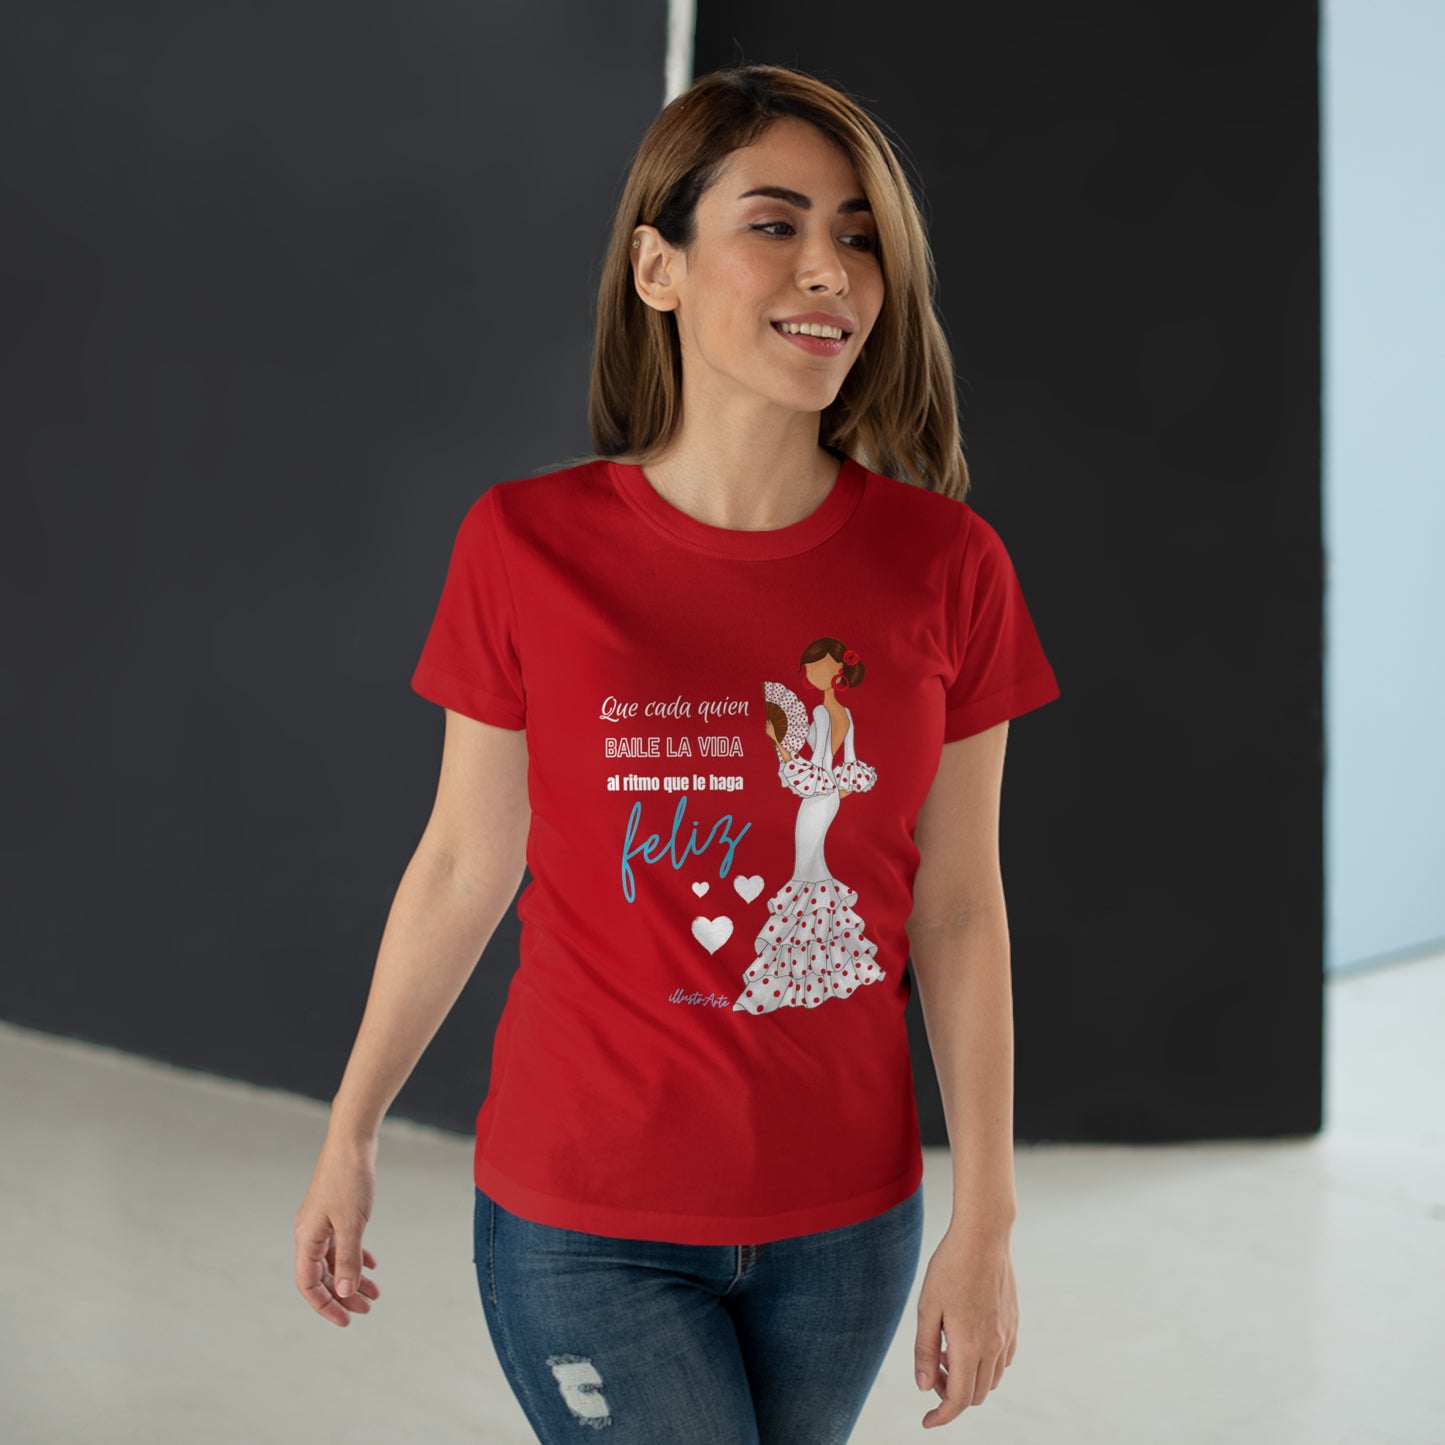 Flamenco Lovers Women's cotton red tee - Flamenca Pepa in a white dress with a positive quote.